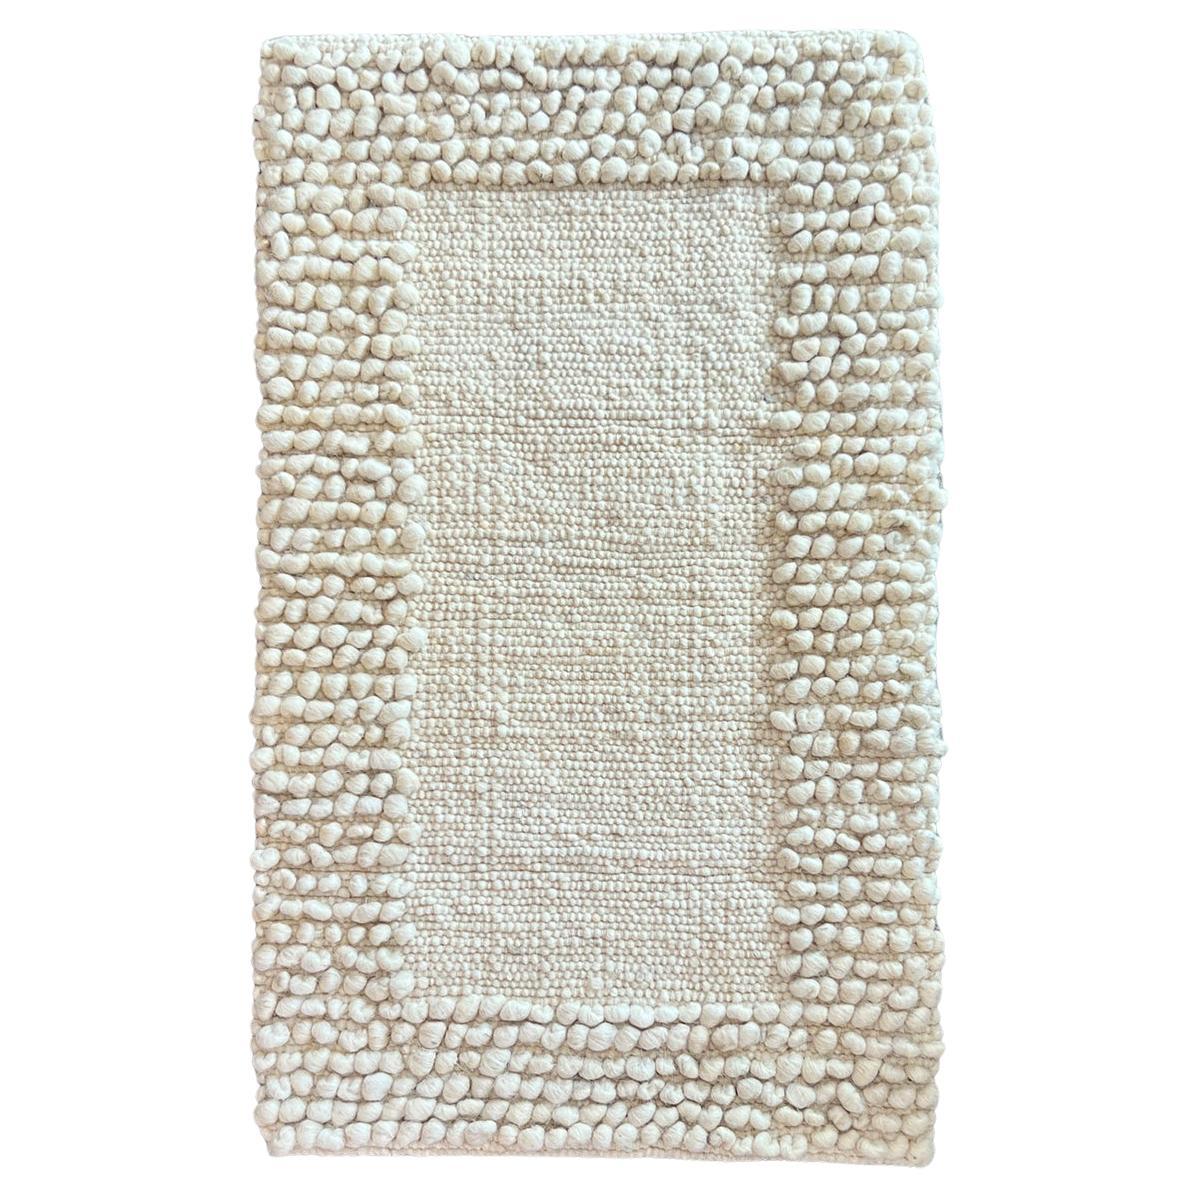 Fatima Bobble Frame Sheep Wool Area Rug in White 2.5ft by 4ft, Handmade For Sale